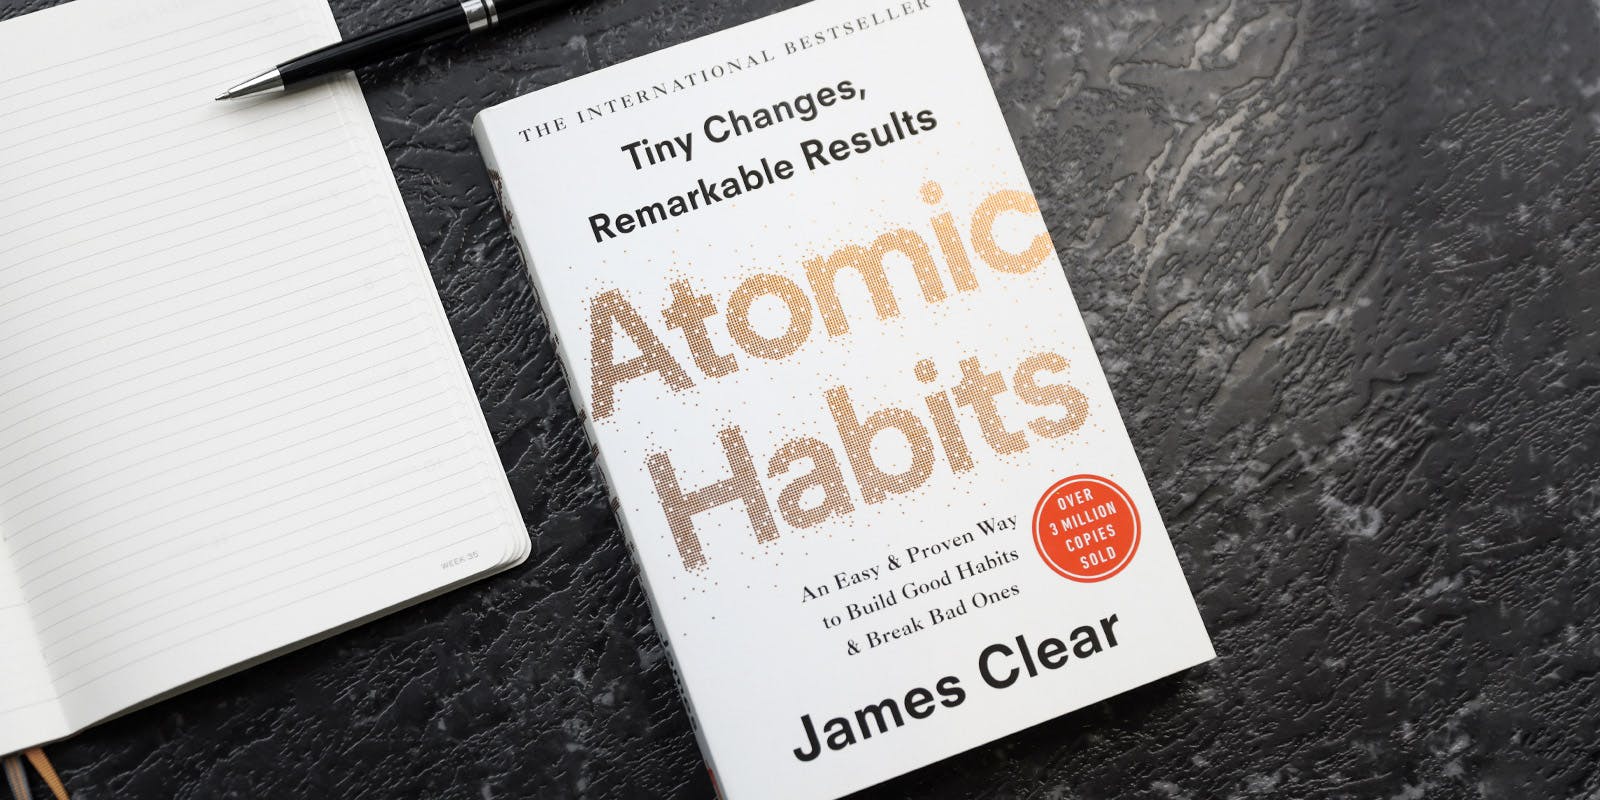 A conversation with James Clear